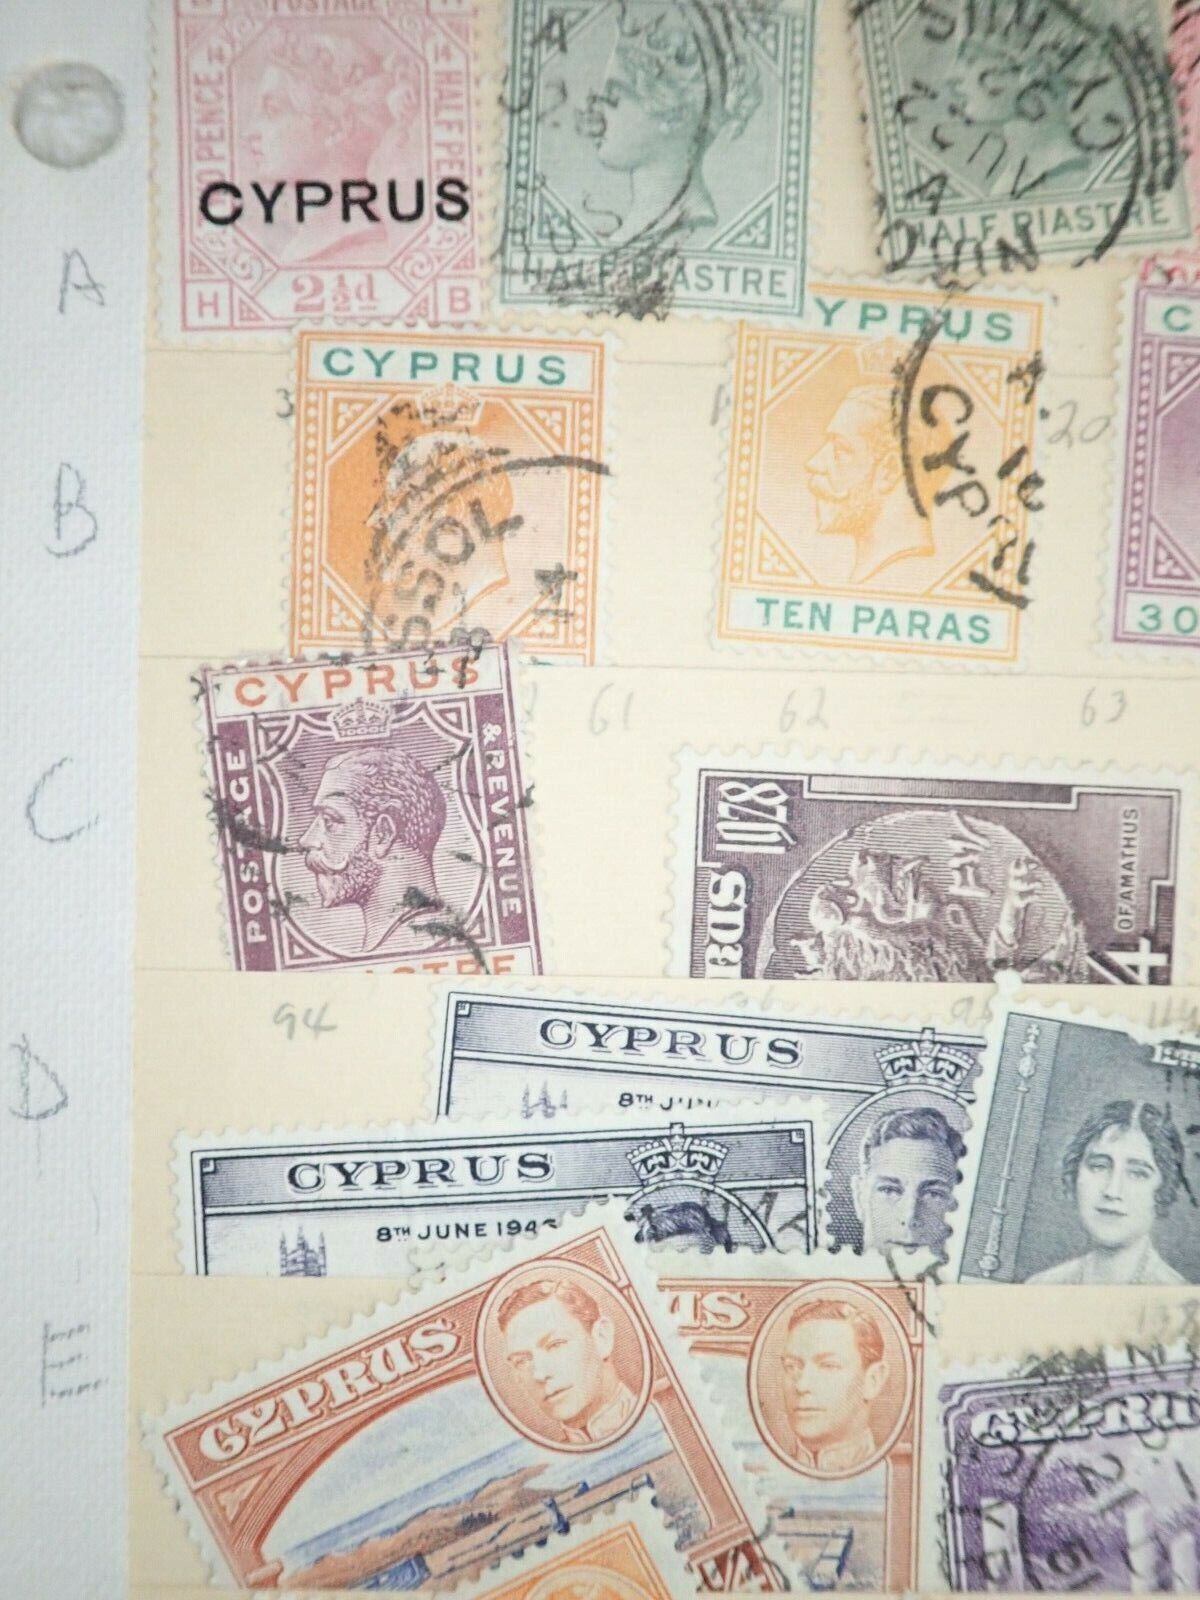 Cyprus Stamps 2Pgs About 109 Used & Unused w/1880 SG3 2 1/2d Rosy Mauve VFH  Без бренда - фотография #11